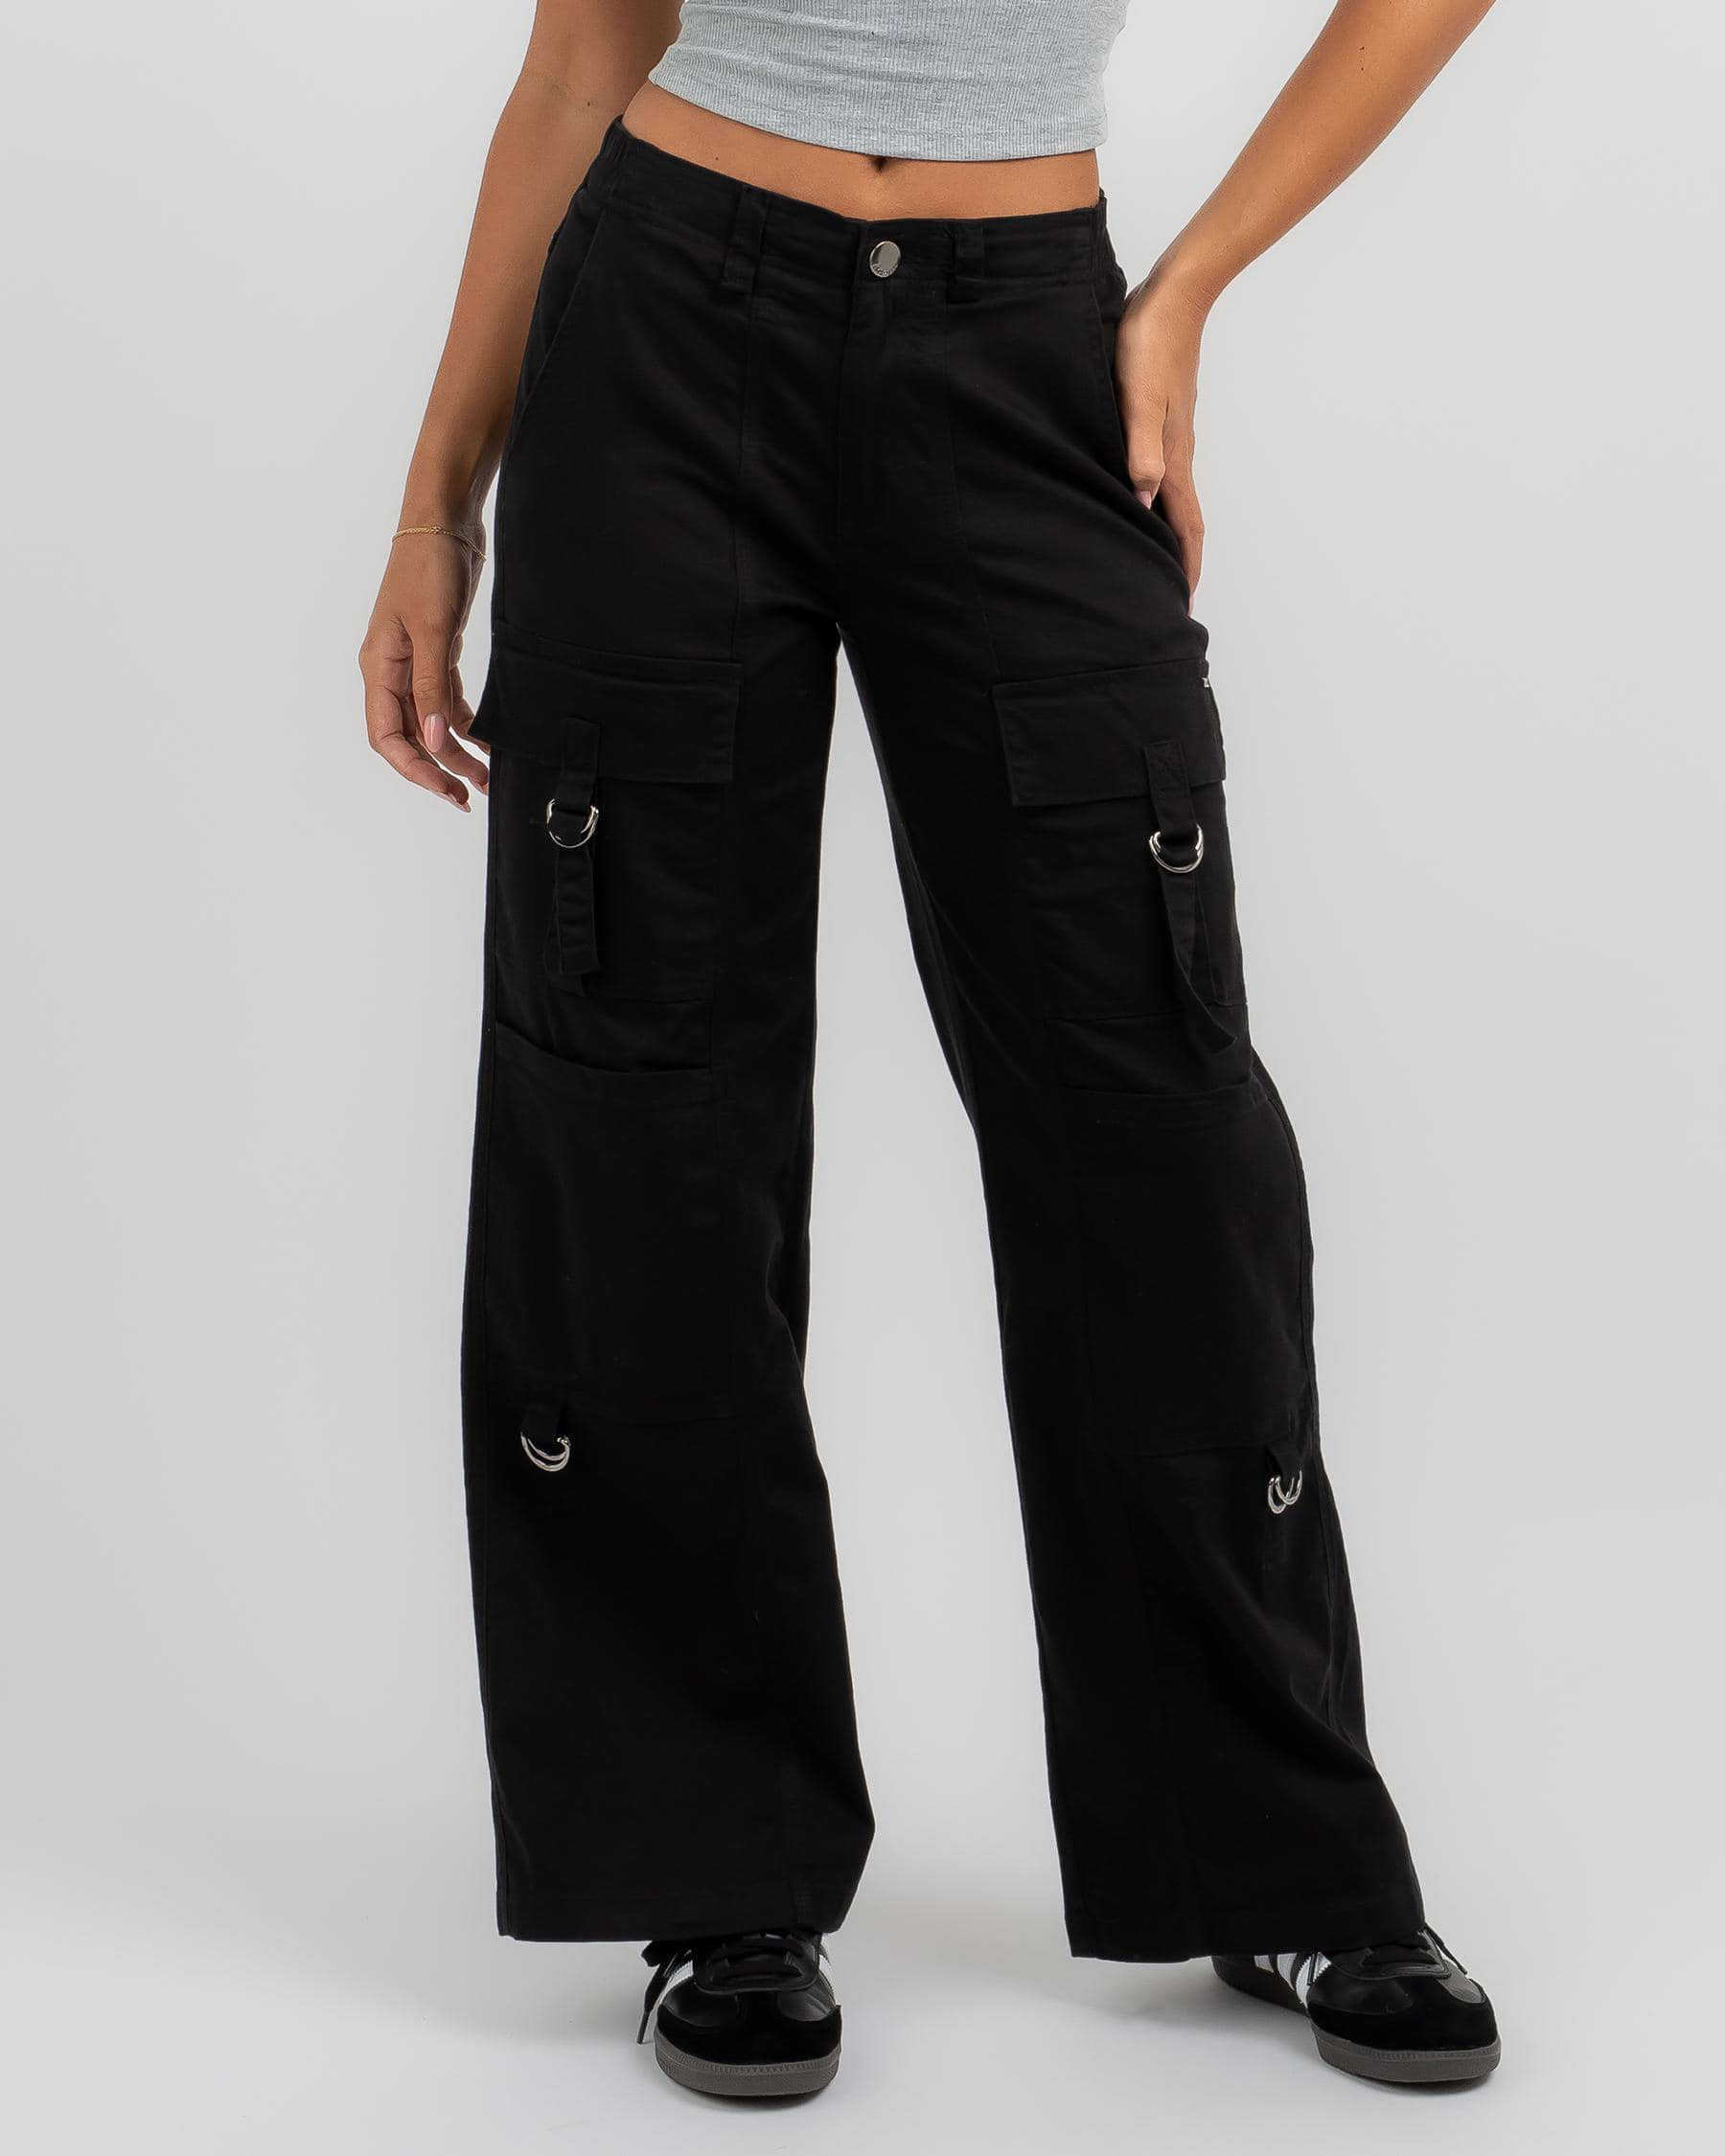 Shop Ava And Ever Rocky Pants In Black - Fast Shipping & Easy Returns ...